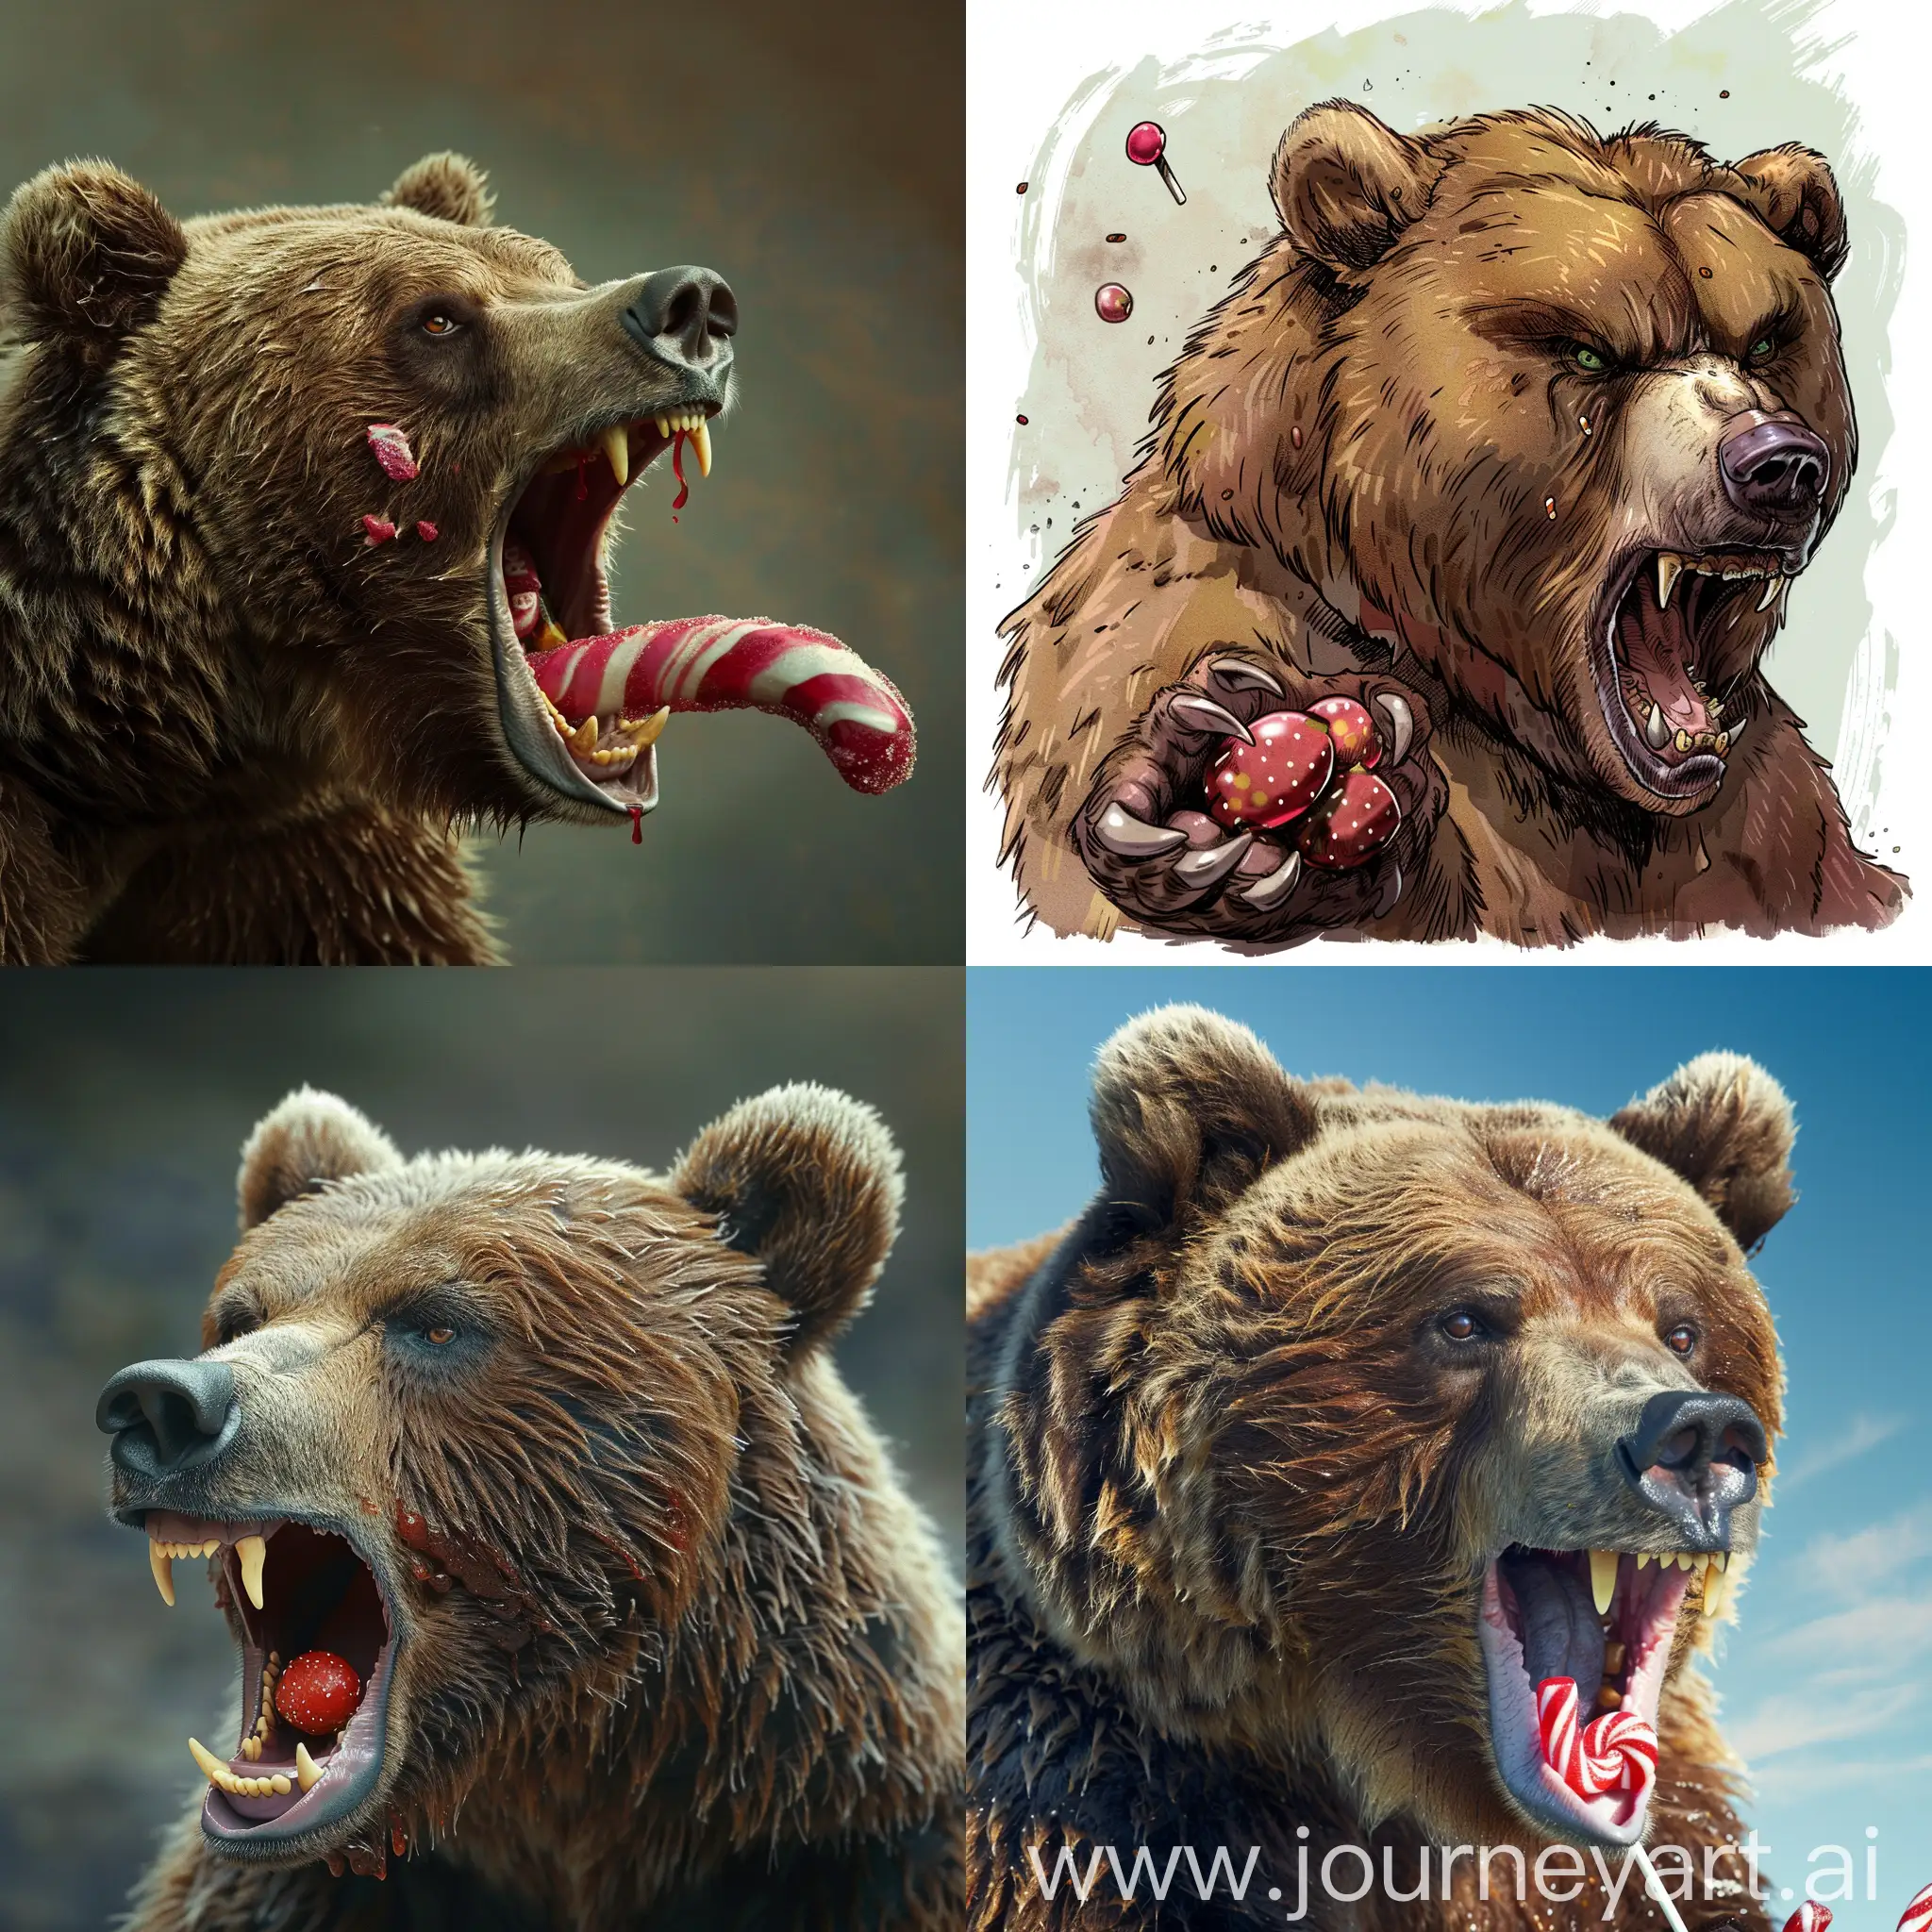 A bear who ate a candy and became angry